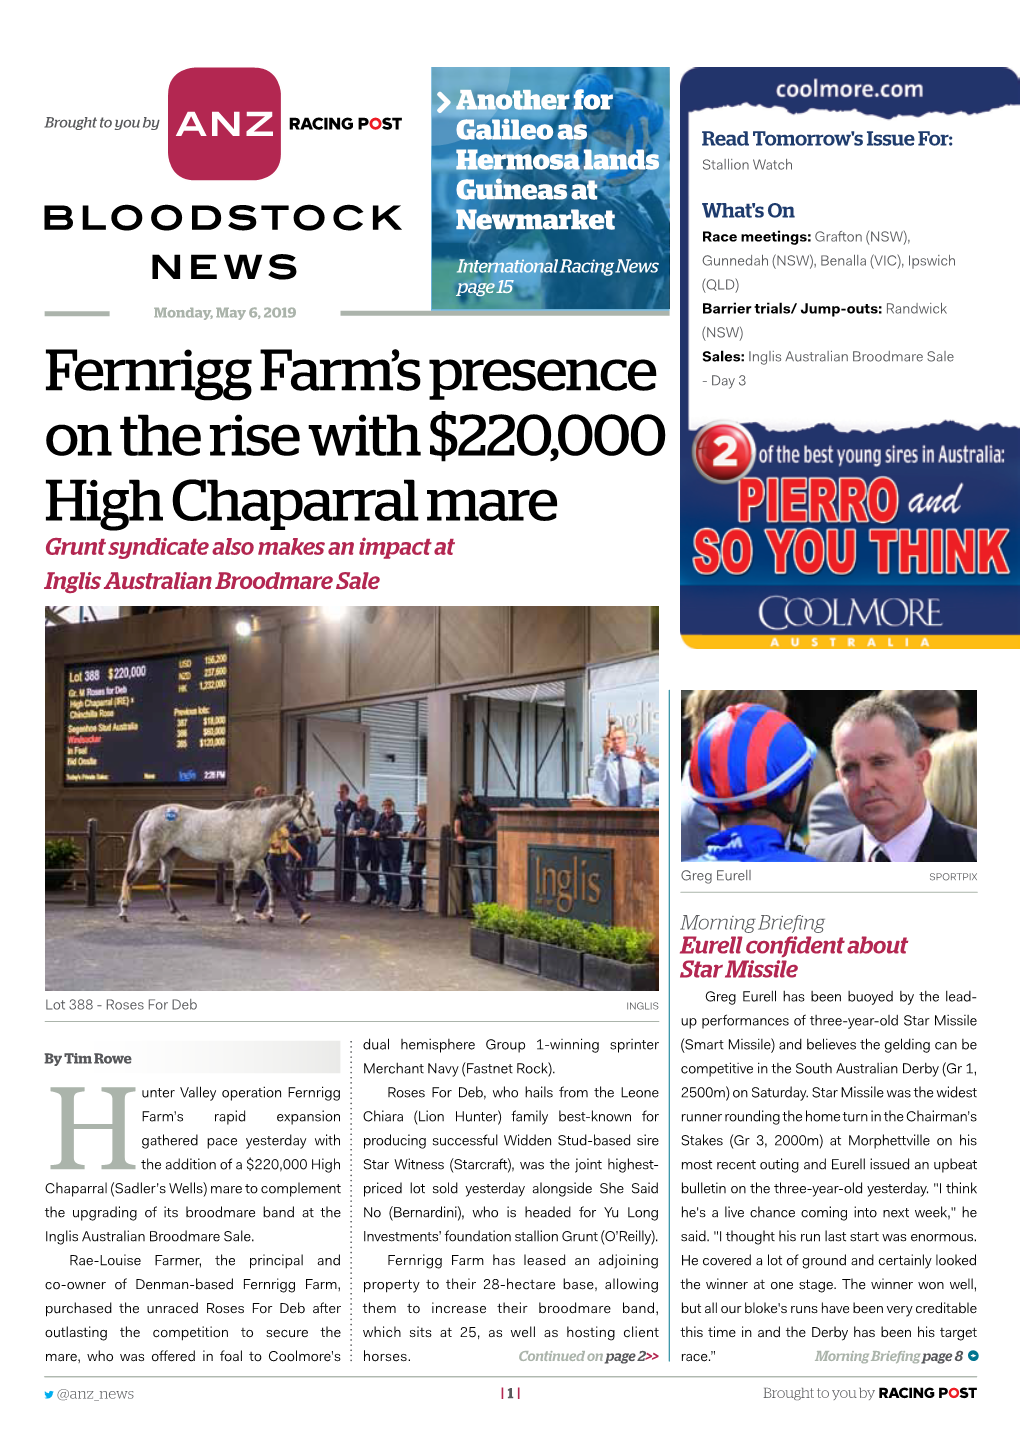 Fernrigg Farm's Presence on the Rise with $220,000 High Chaparral Mare